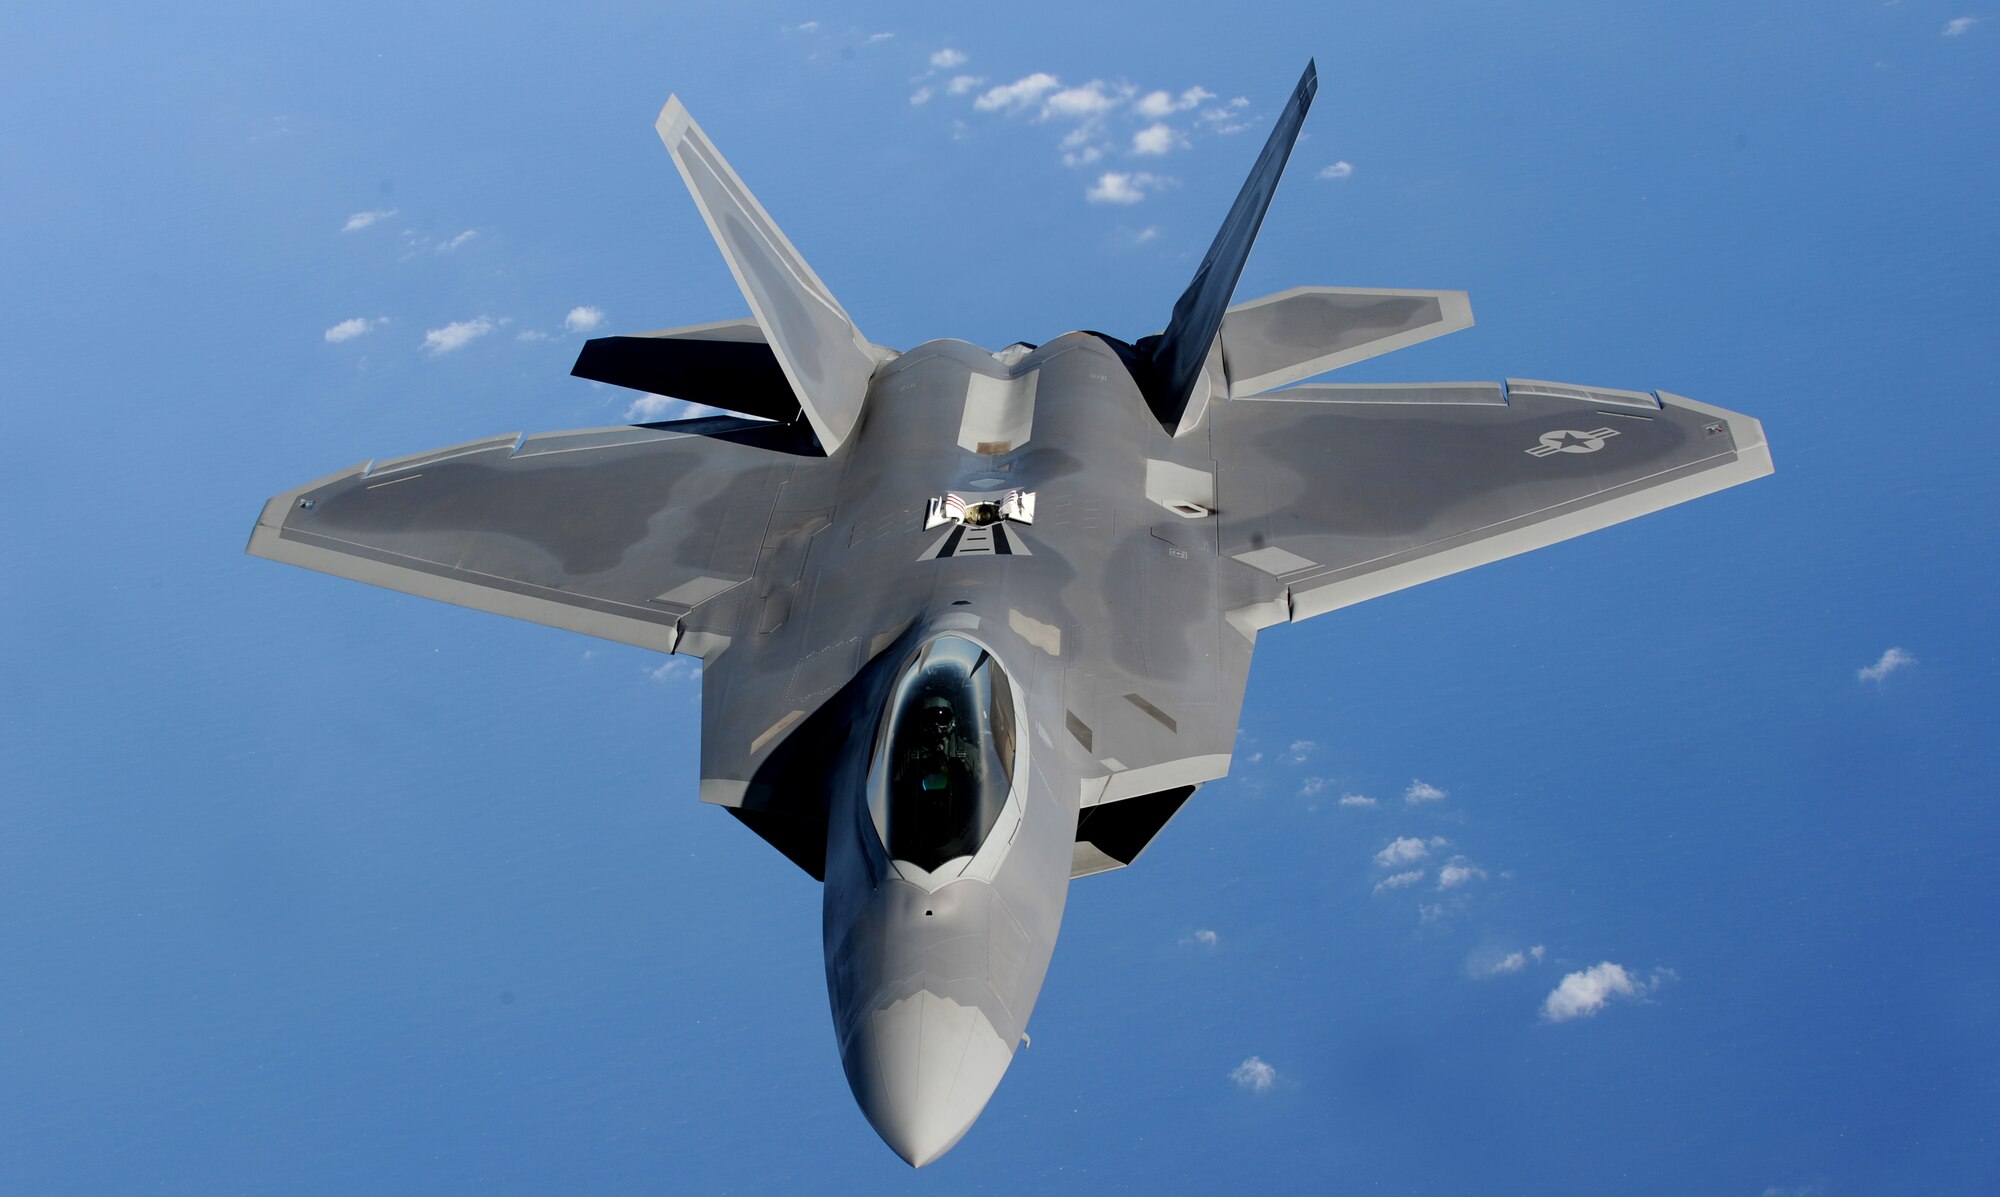 ANDERSEN AIR FORCE BASE, Guam - An F-22 Raptor moves into position to receive fuel from a KC-135 Stratotanker over the Pacific Ocean Jan. 28 The Raptors are deployed from Elmendorf AFB, Alaska, to the 90th Expeditionary Fighter Squadron at Andersen AFB, Guam. The stealth-fighters, along with associated maintenance and support personnel will participate in various exercises that provide routine training in an environment different from their home station. The F-22 is a highly maneuverable combat aircraft that can avoid enemy detection, cruise at supersonic speeds, and provide the joint force commander an unprecedented level of integrated situational awareness. (U.S. Air Force photo by Master Sgt. Kevin J. Gruenwald) 




















  












 











































  












 

























